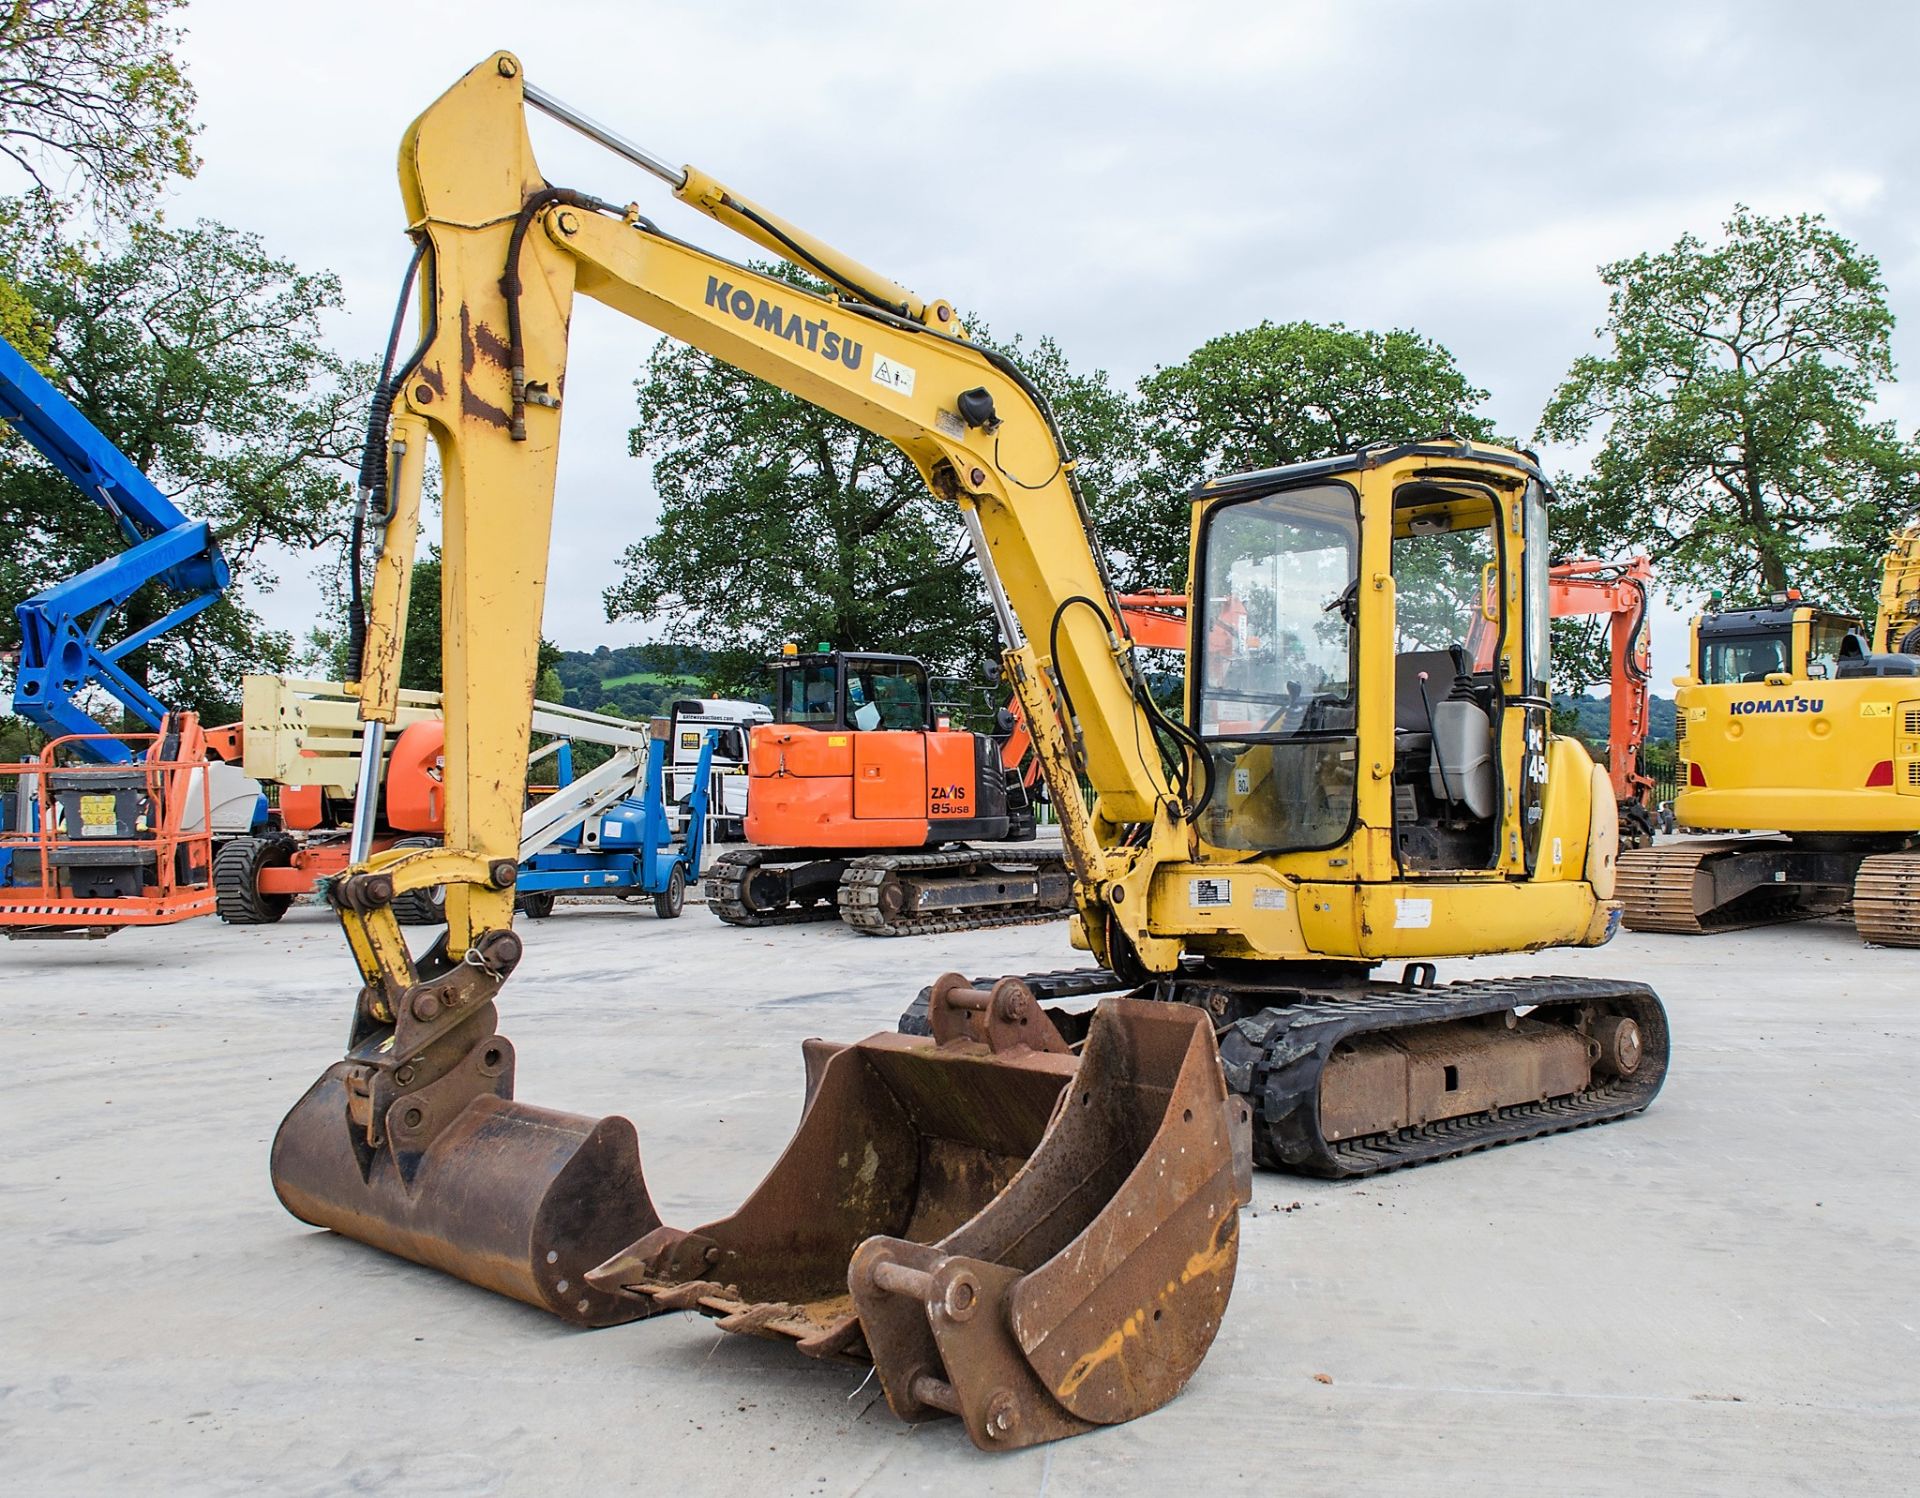 Komatsu PC45R 4.5 tonne rubber tracked mini excavator Year: 2004 S/N: 22289 Recorded Hours: 6109